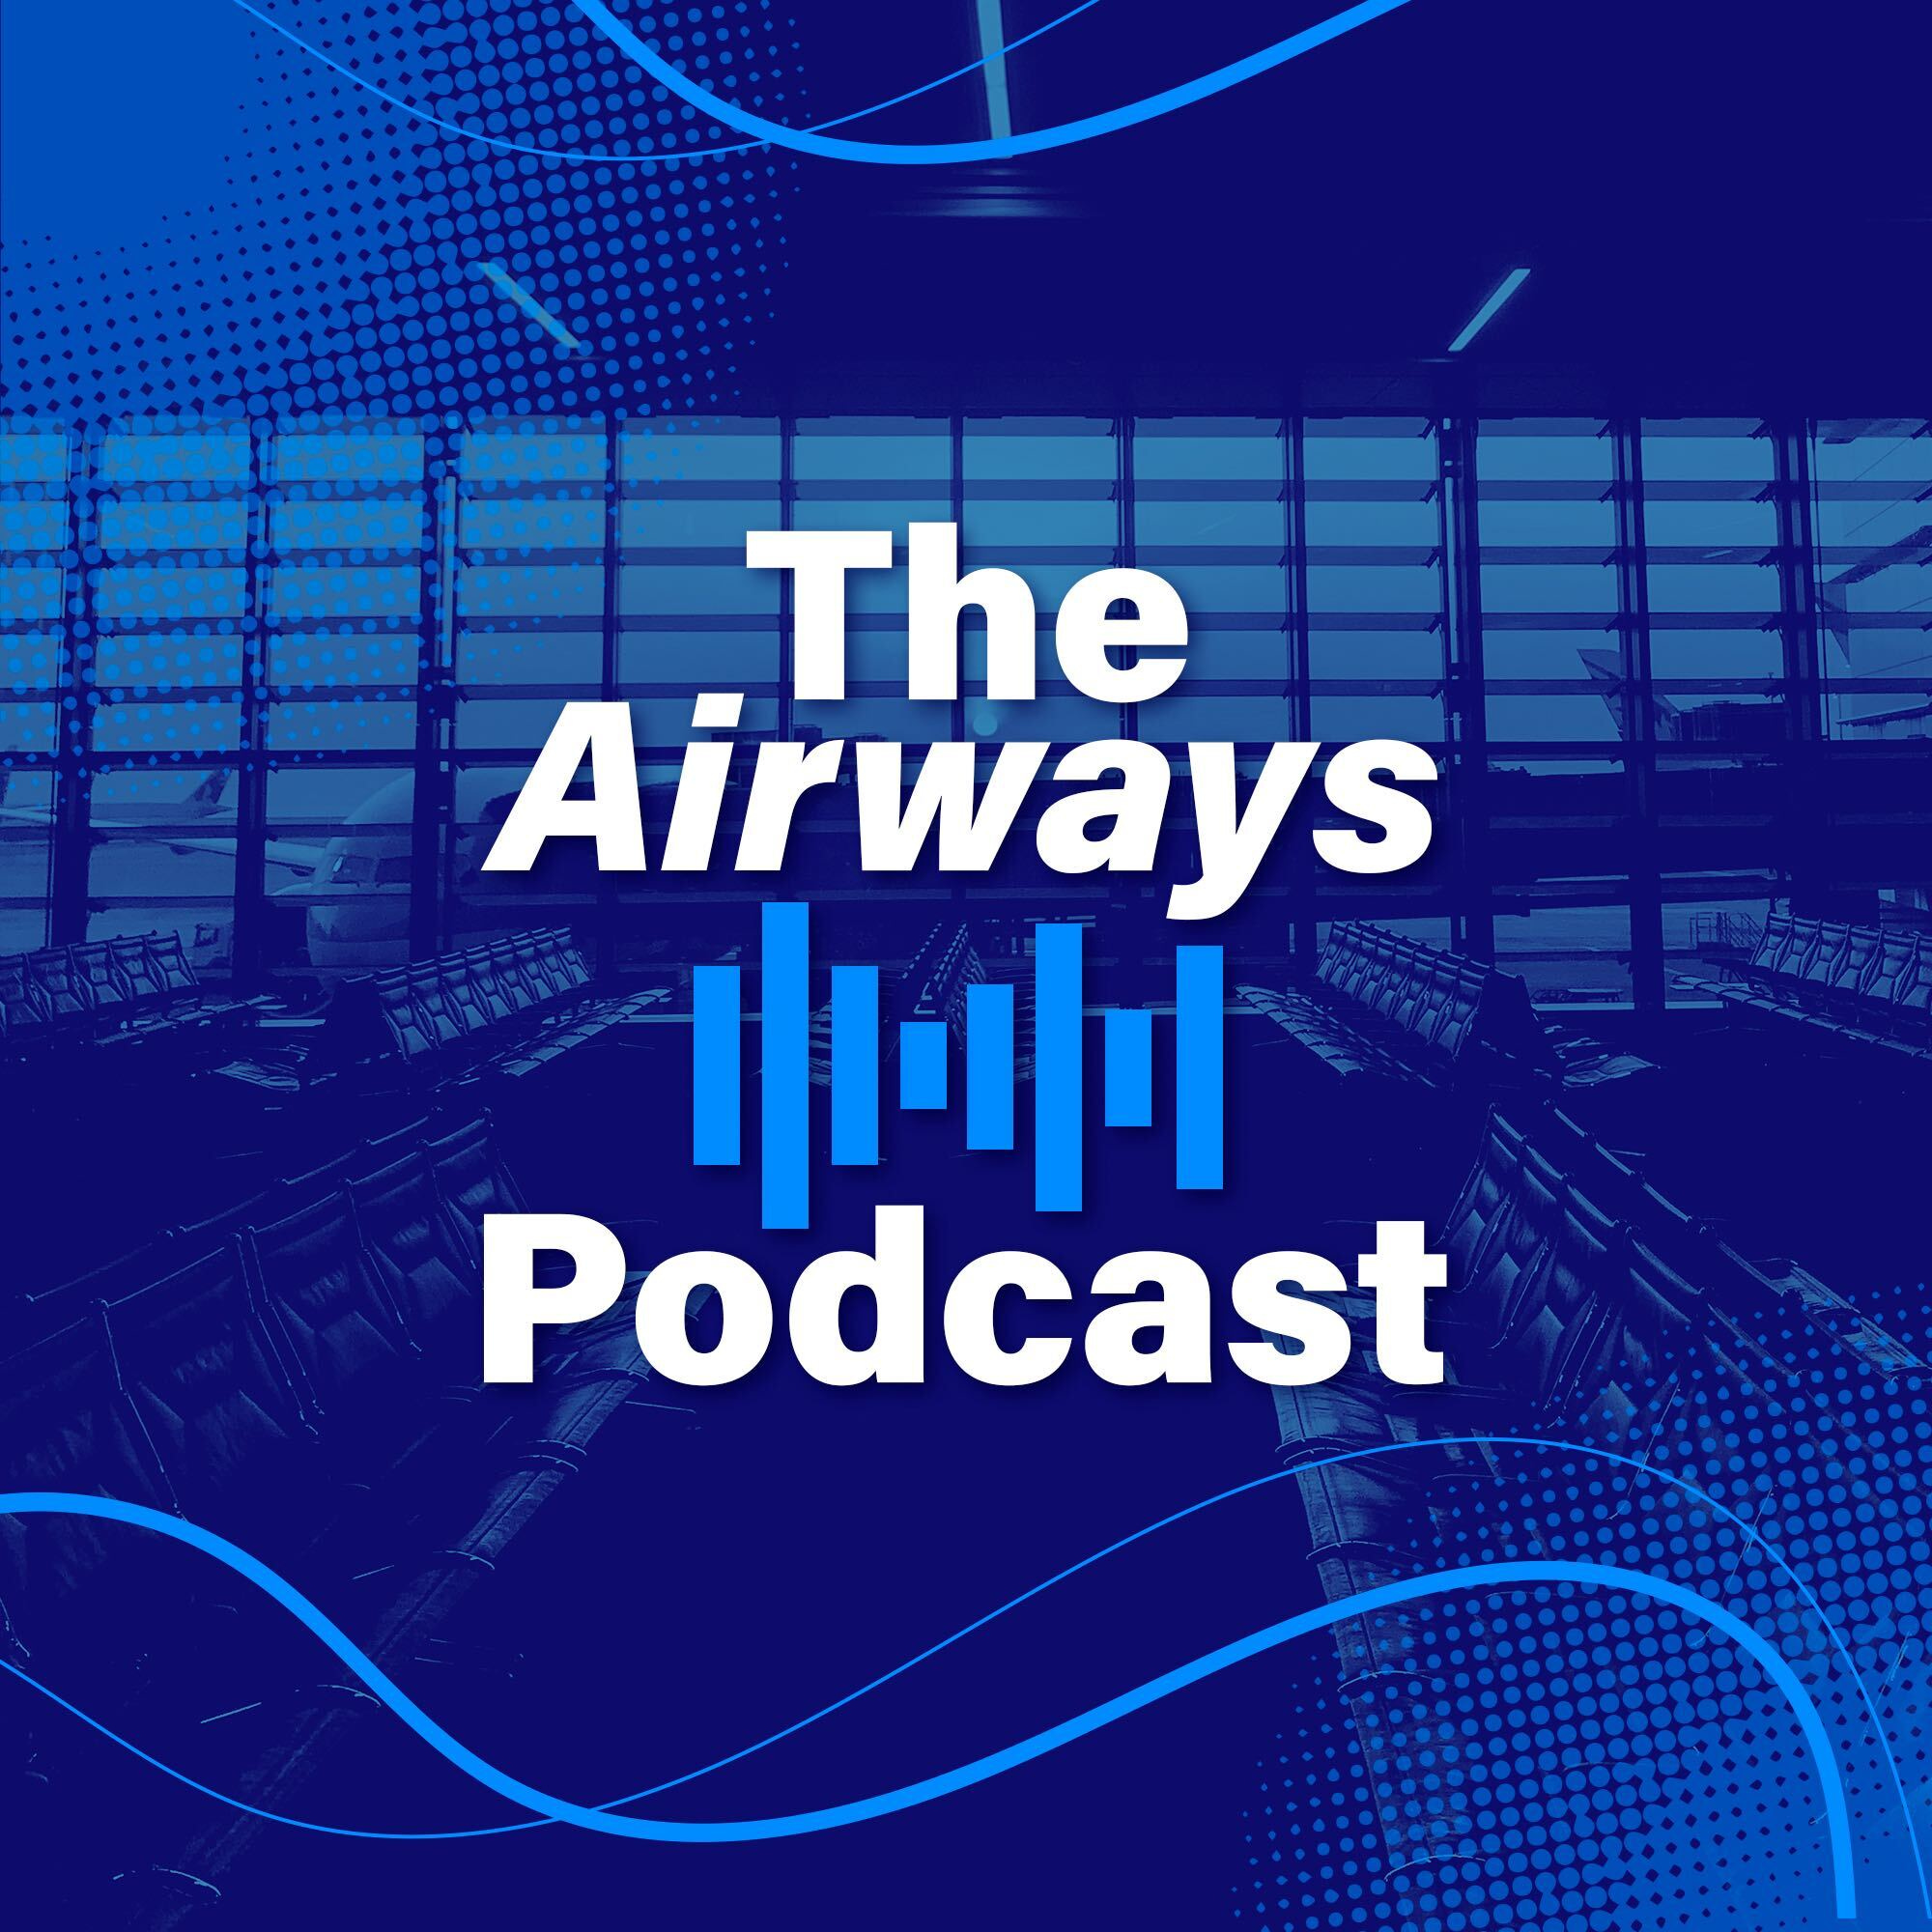 A Deep Dive into India Aviation with Devesh R. Agarwal